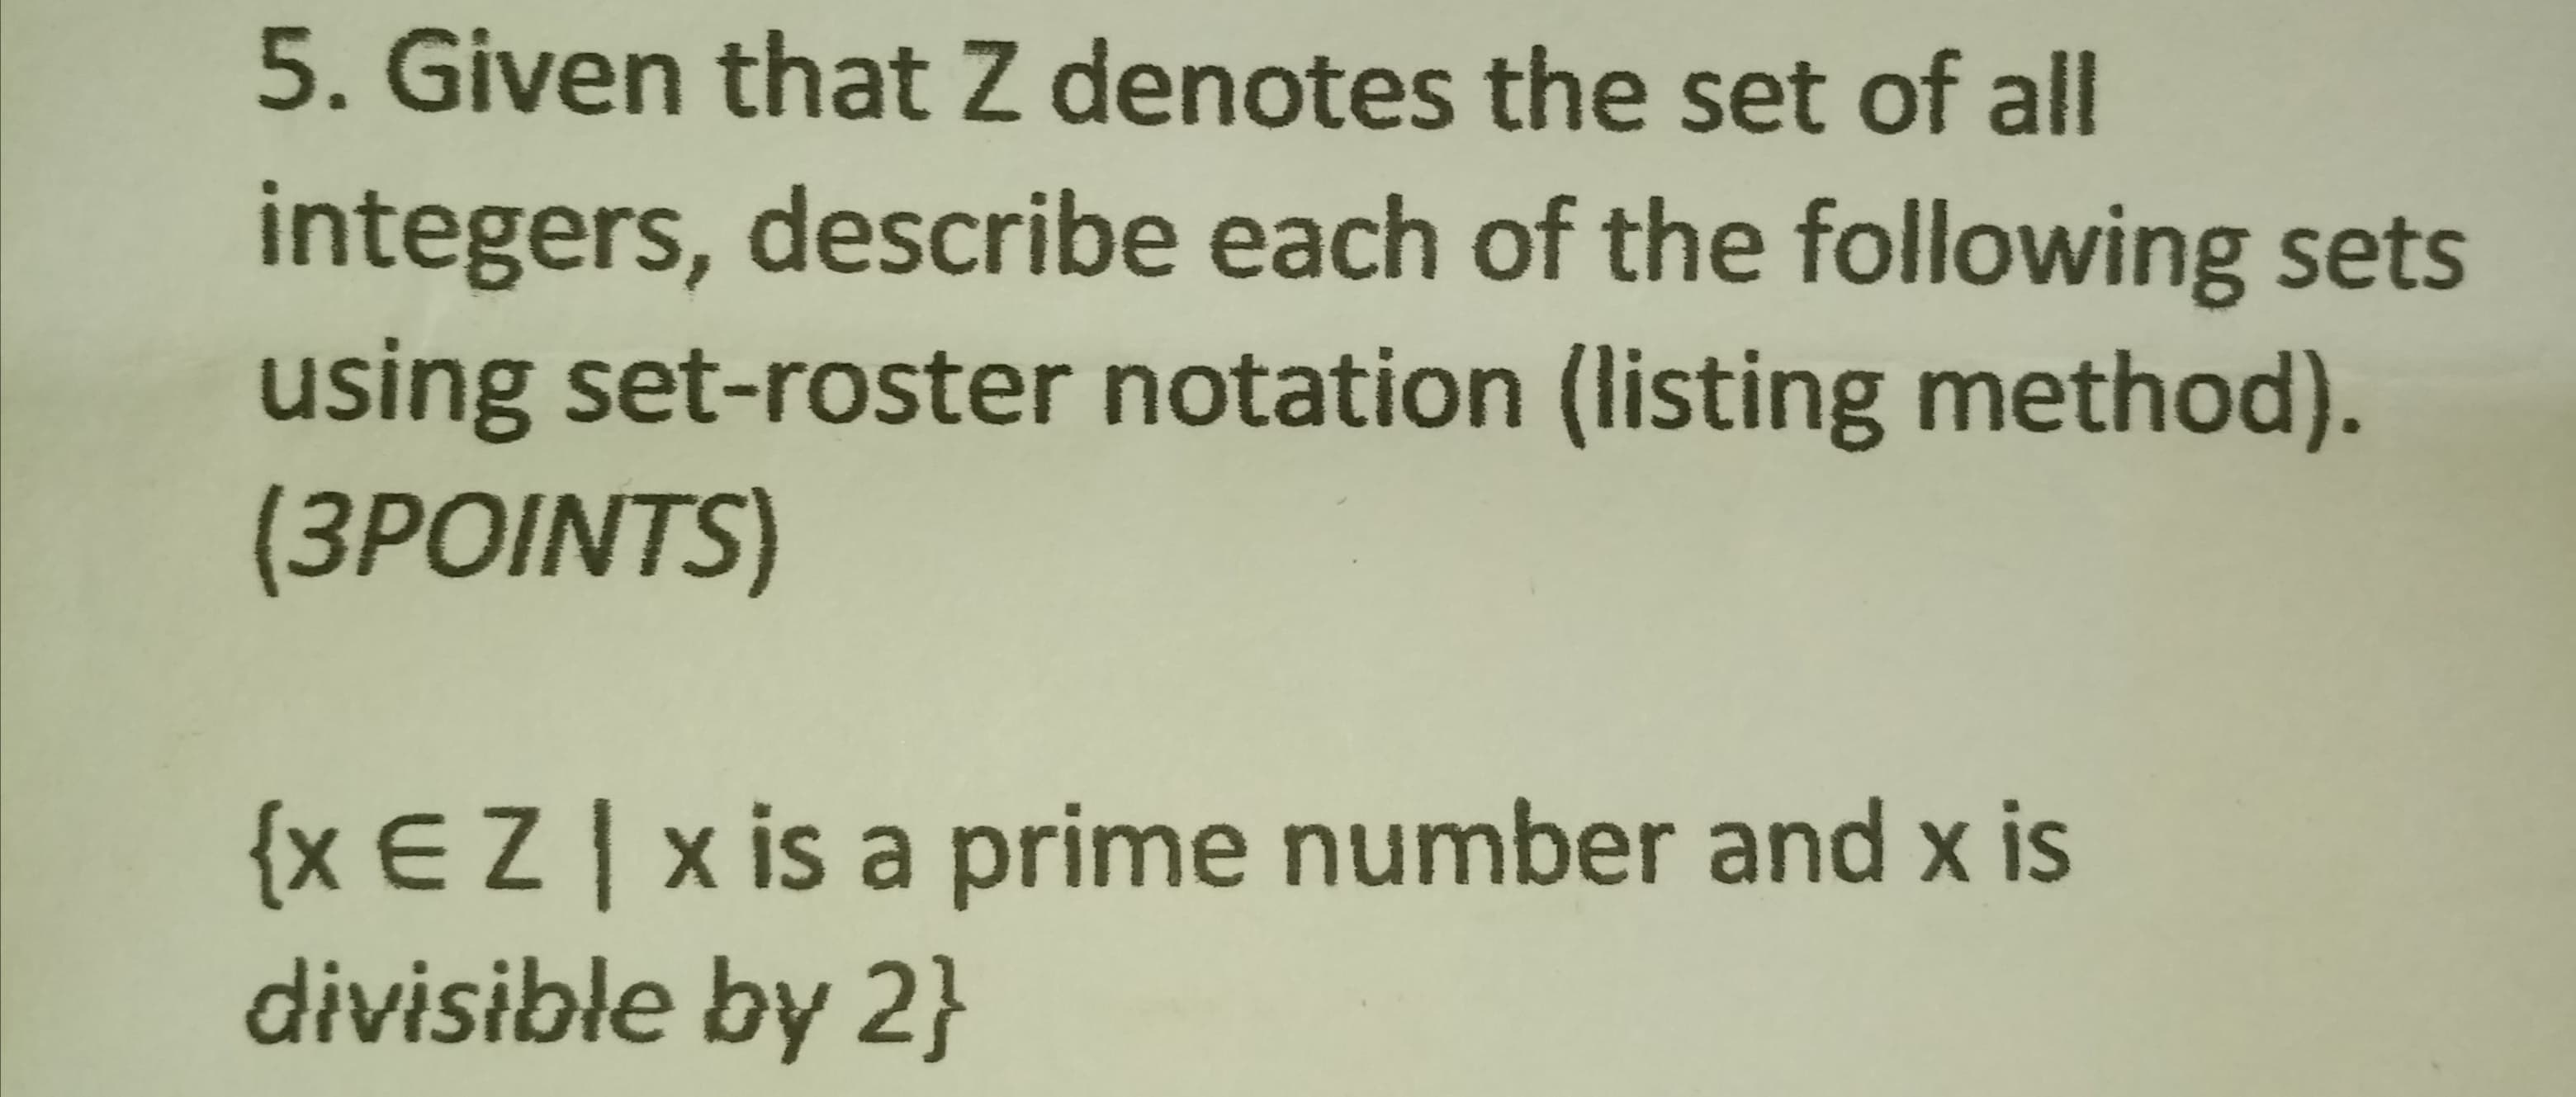 5. Given that Z denotes the set of all
integers, describe each of the following sets
using set-roster notation (listing method).
(3POINTS)
{x EZ|x is a prime number and x is
divisible by 2}
